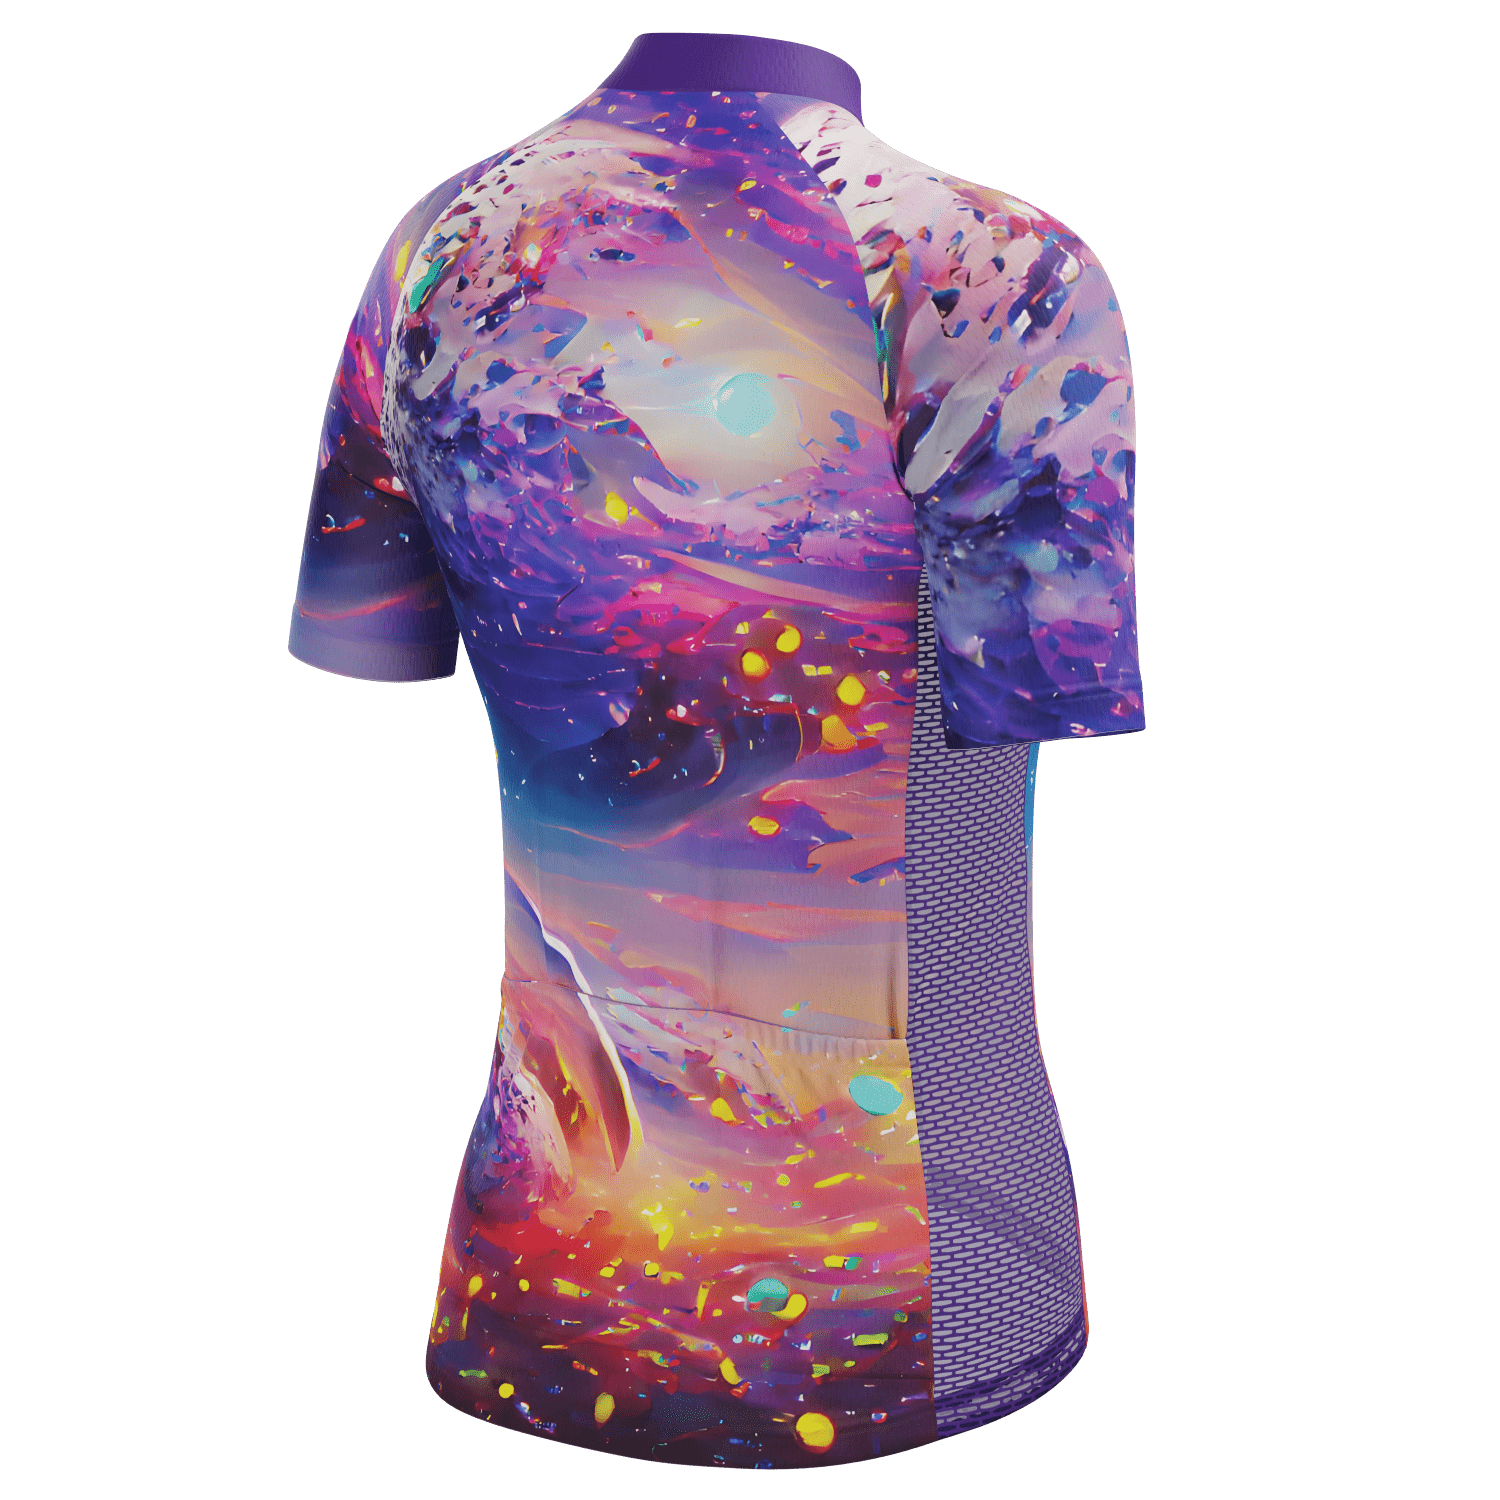 Women's Planets Short Sleeve Cycling Jersey